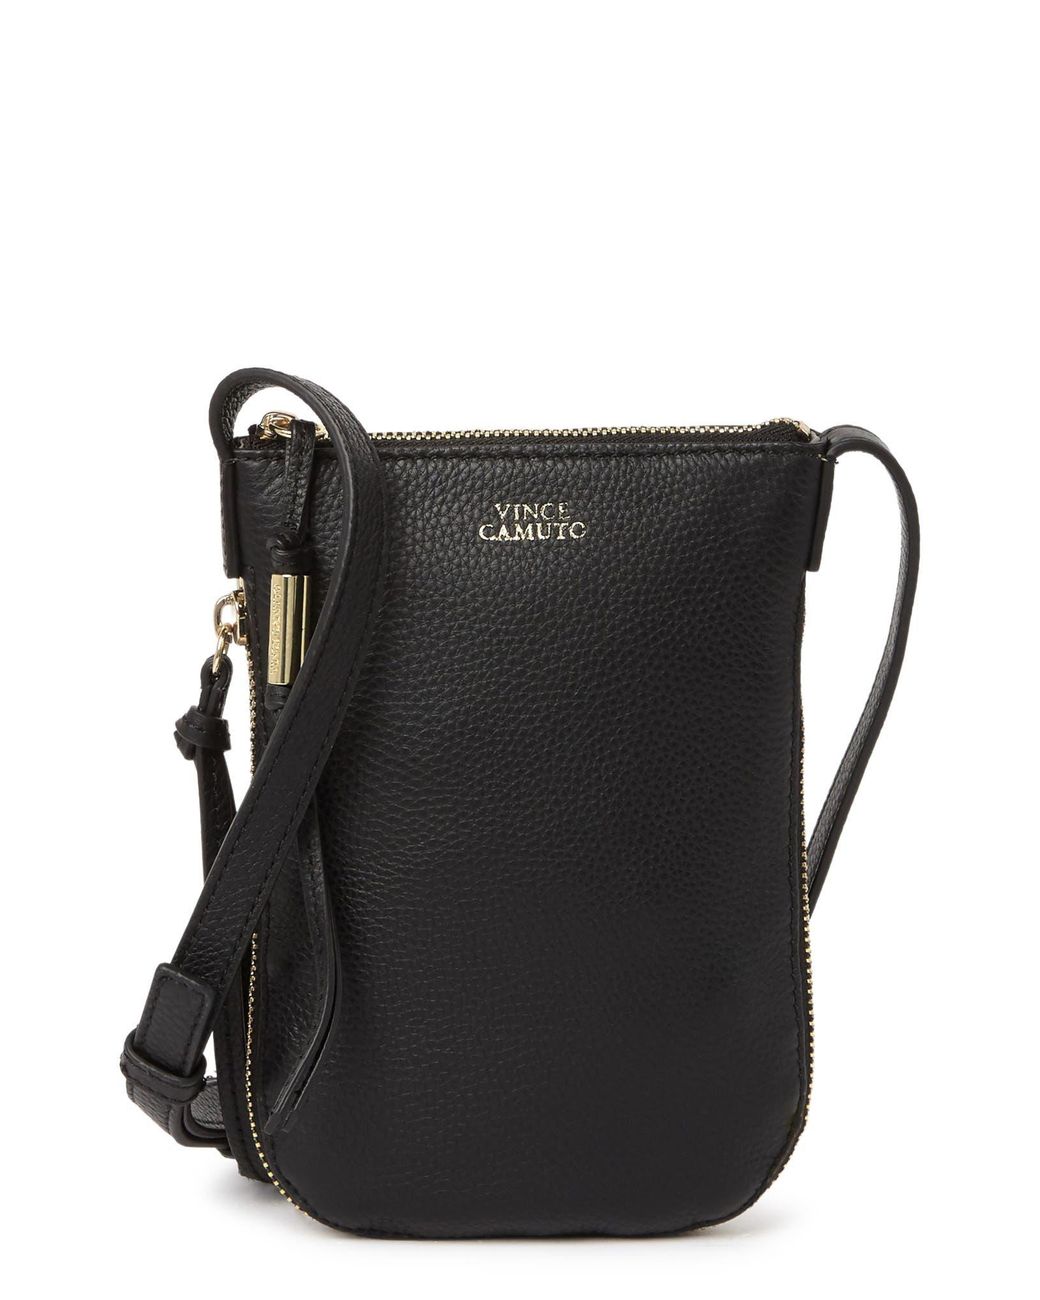 Buy the Vince Camuto Crossbody Wallet Purse | GoodwillFinds